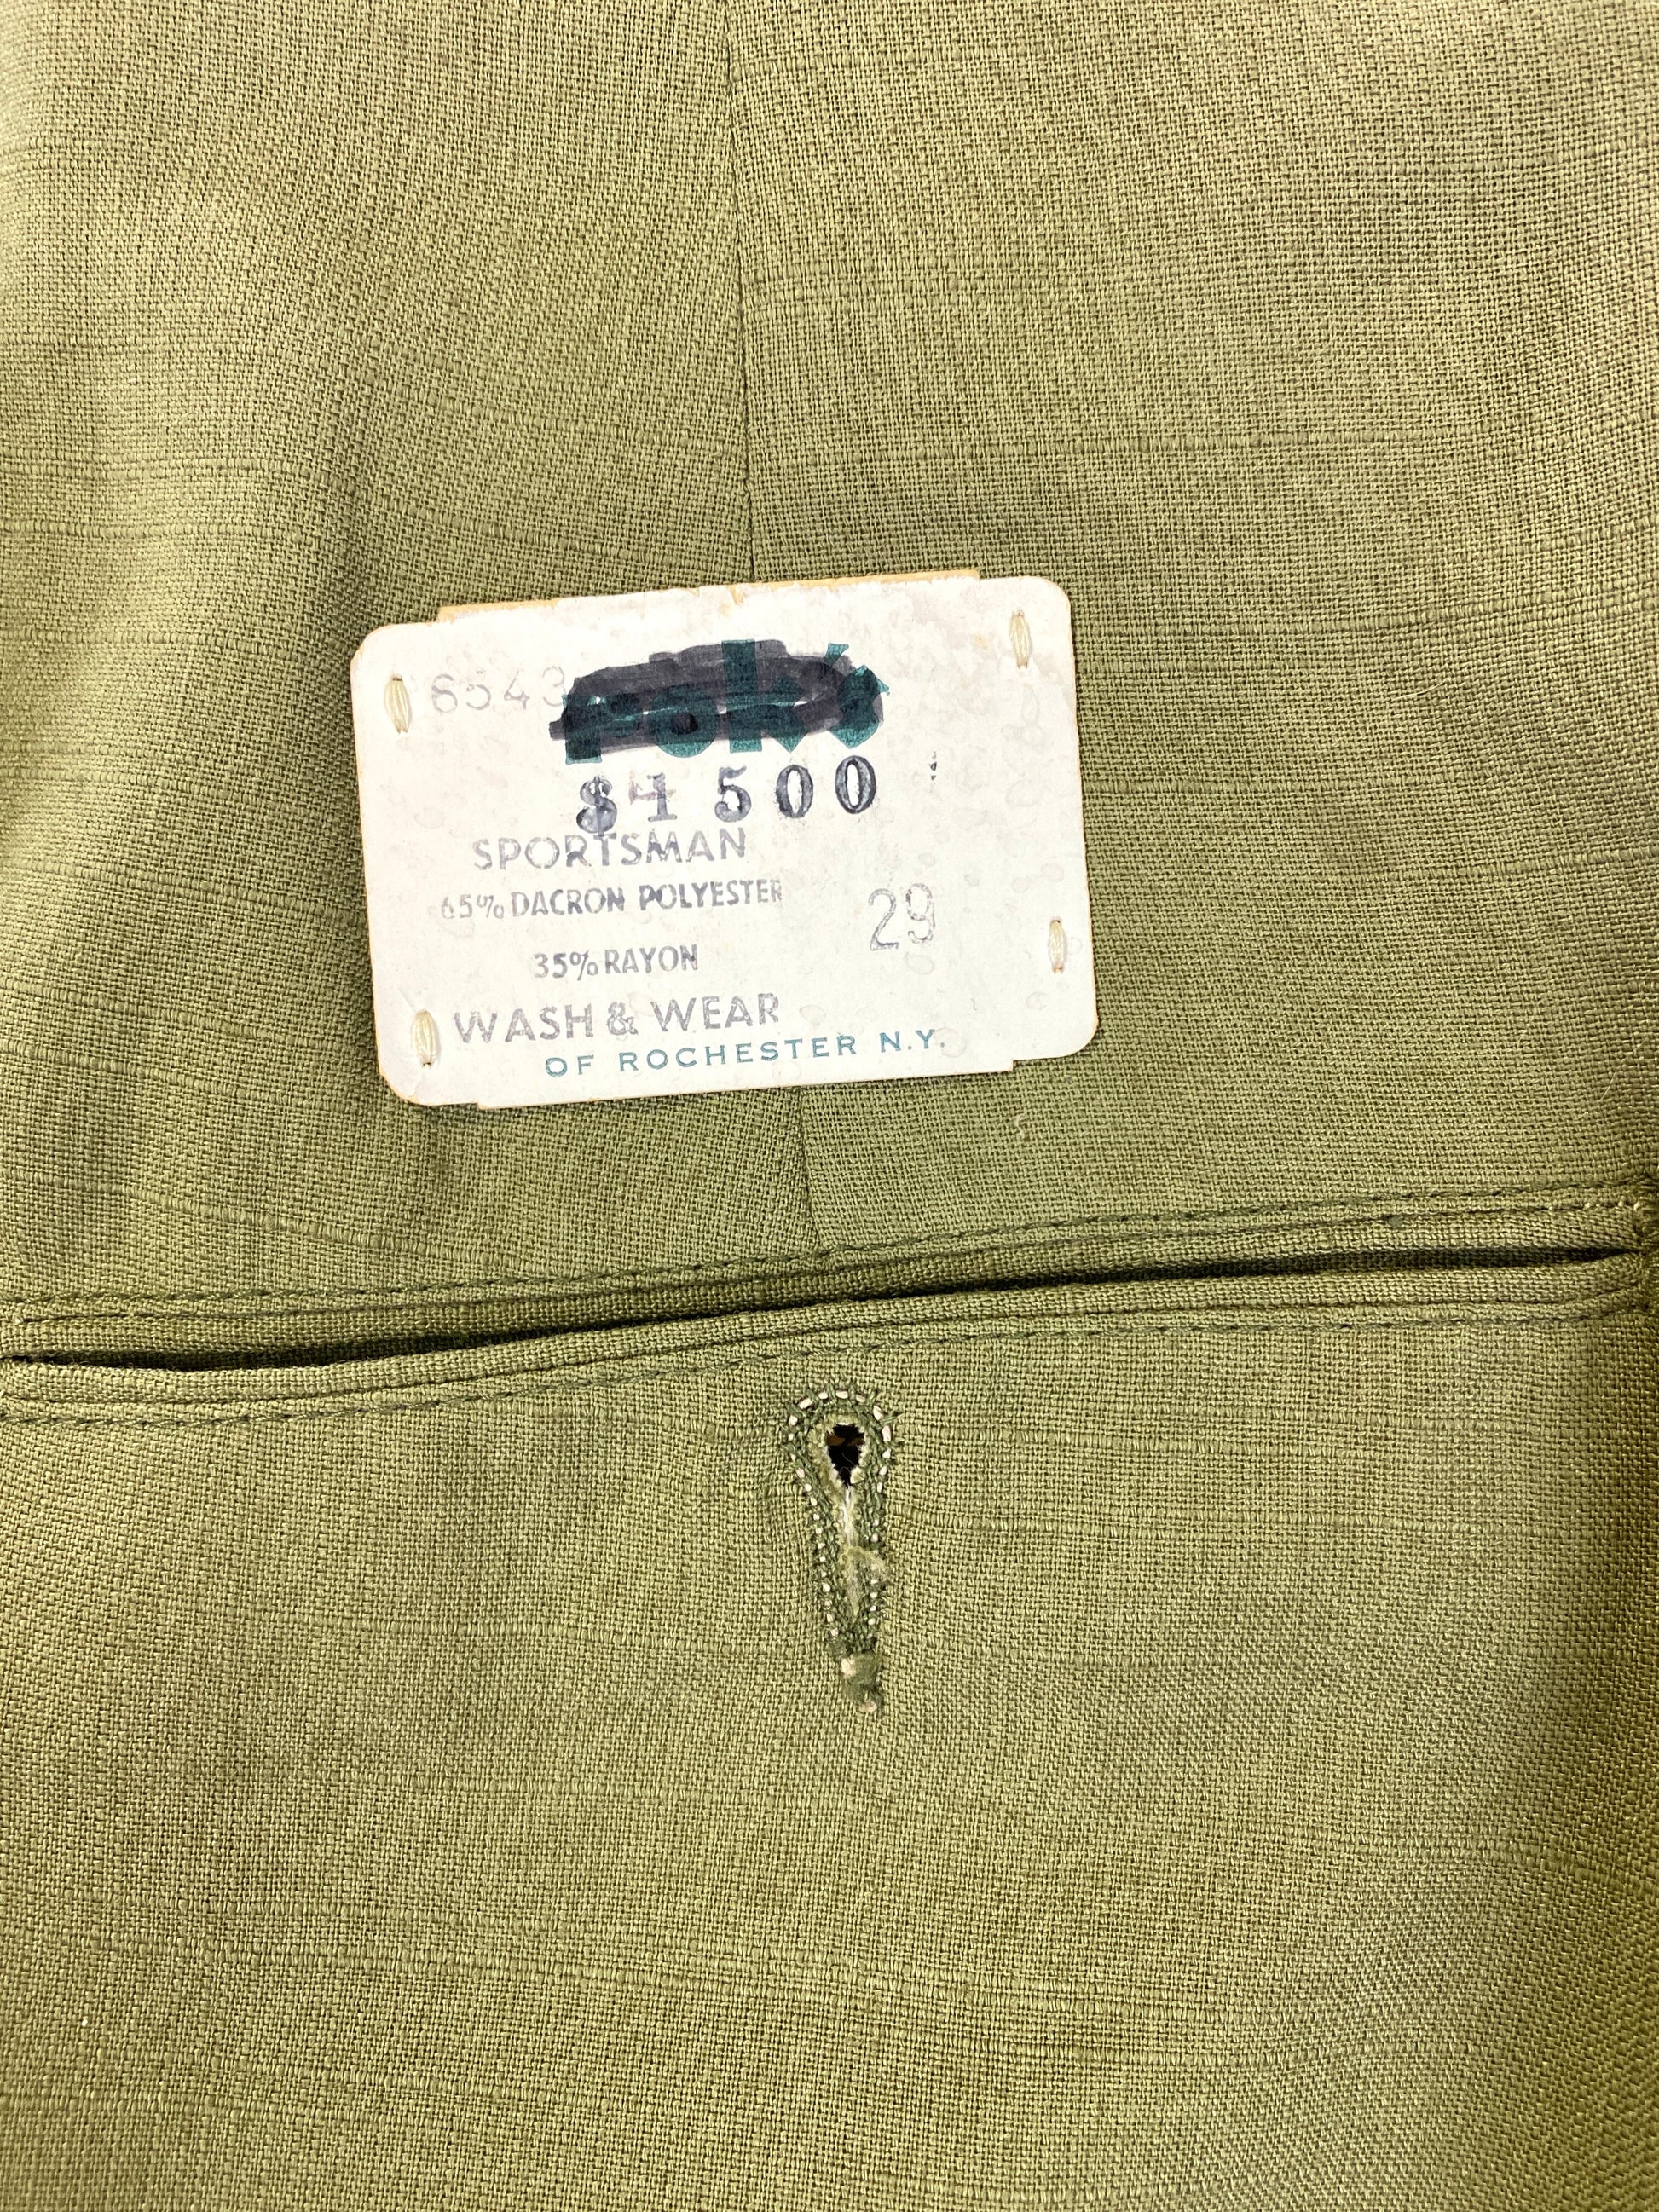 Men's Polyester Trousers